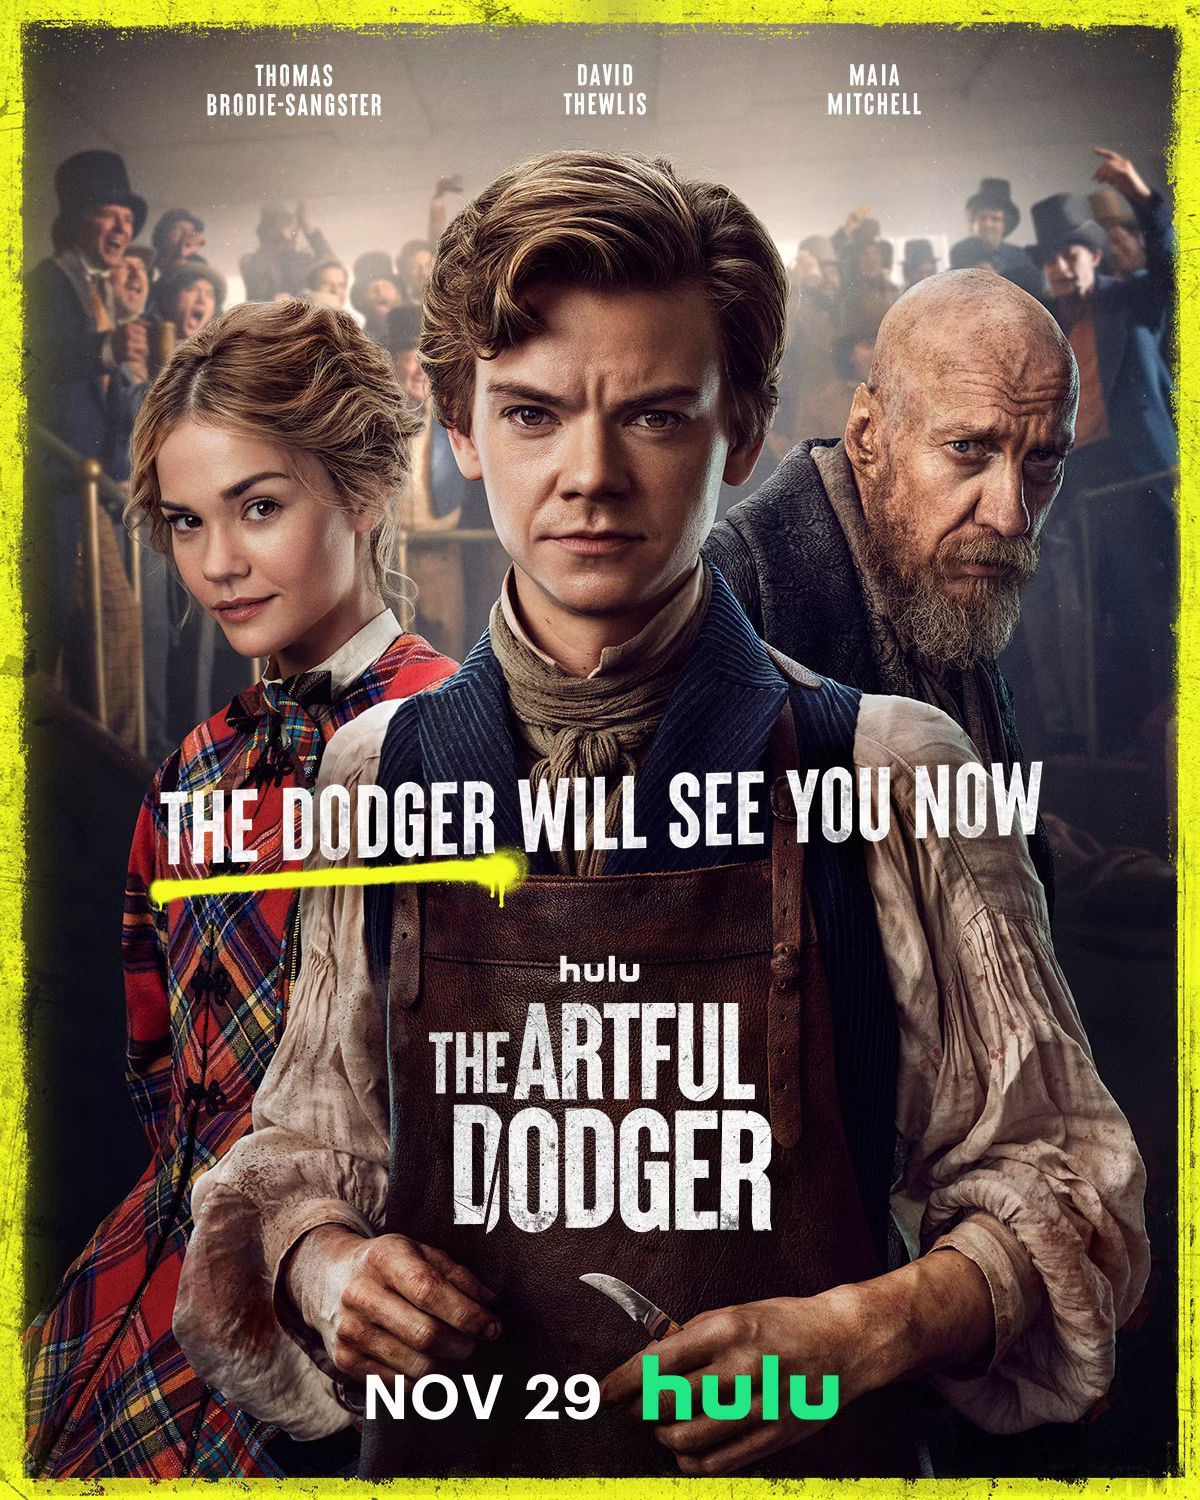 Thomas BrodieSangster Eyes His Latest Coup in The Artful Dodger Trailer